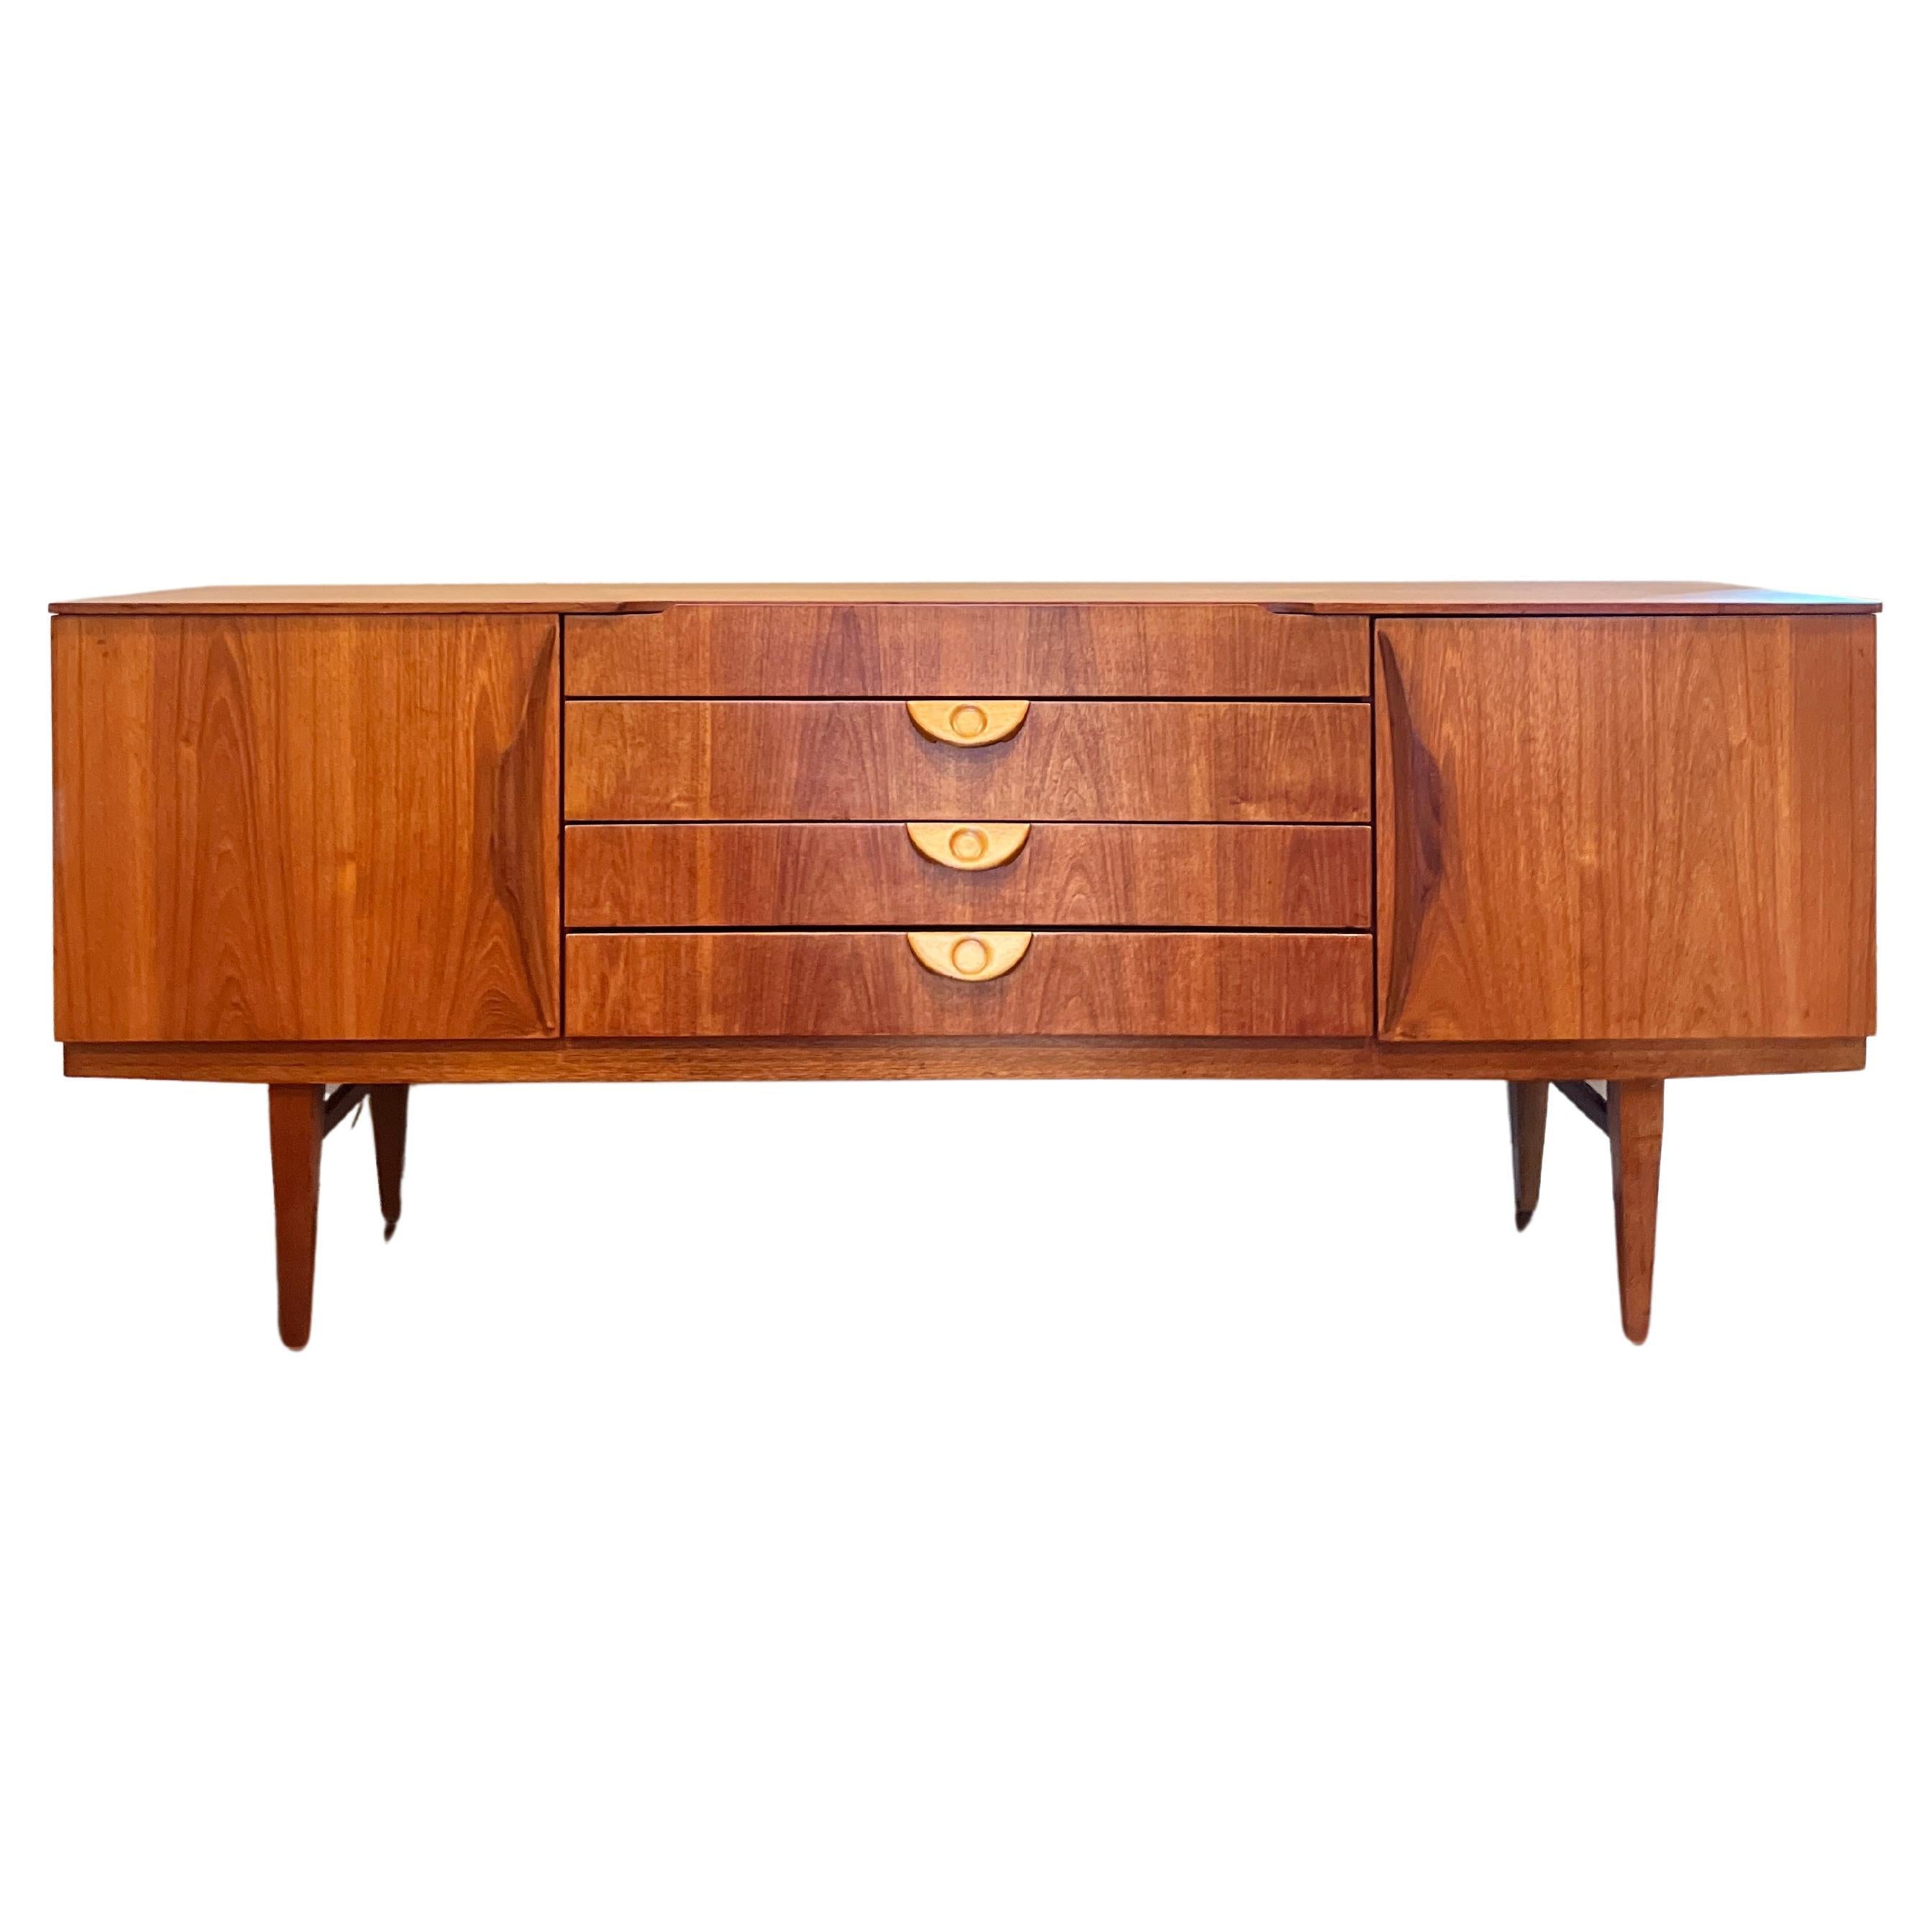 This beautiful mid century modern sideboard by Beautility, circa 1960s